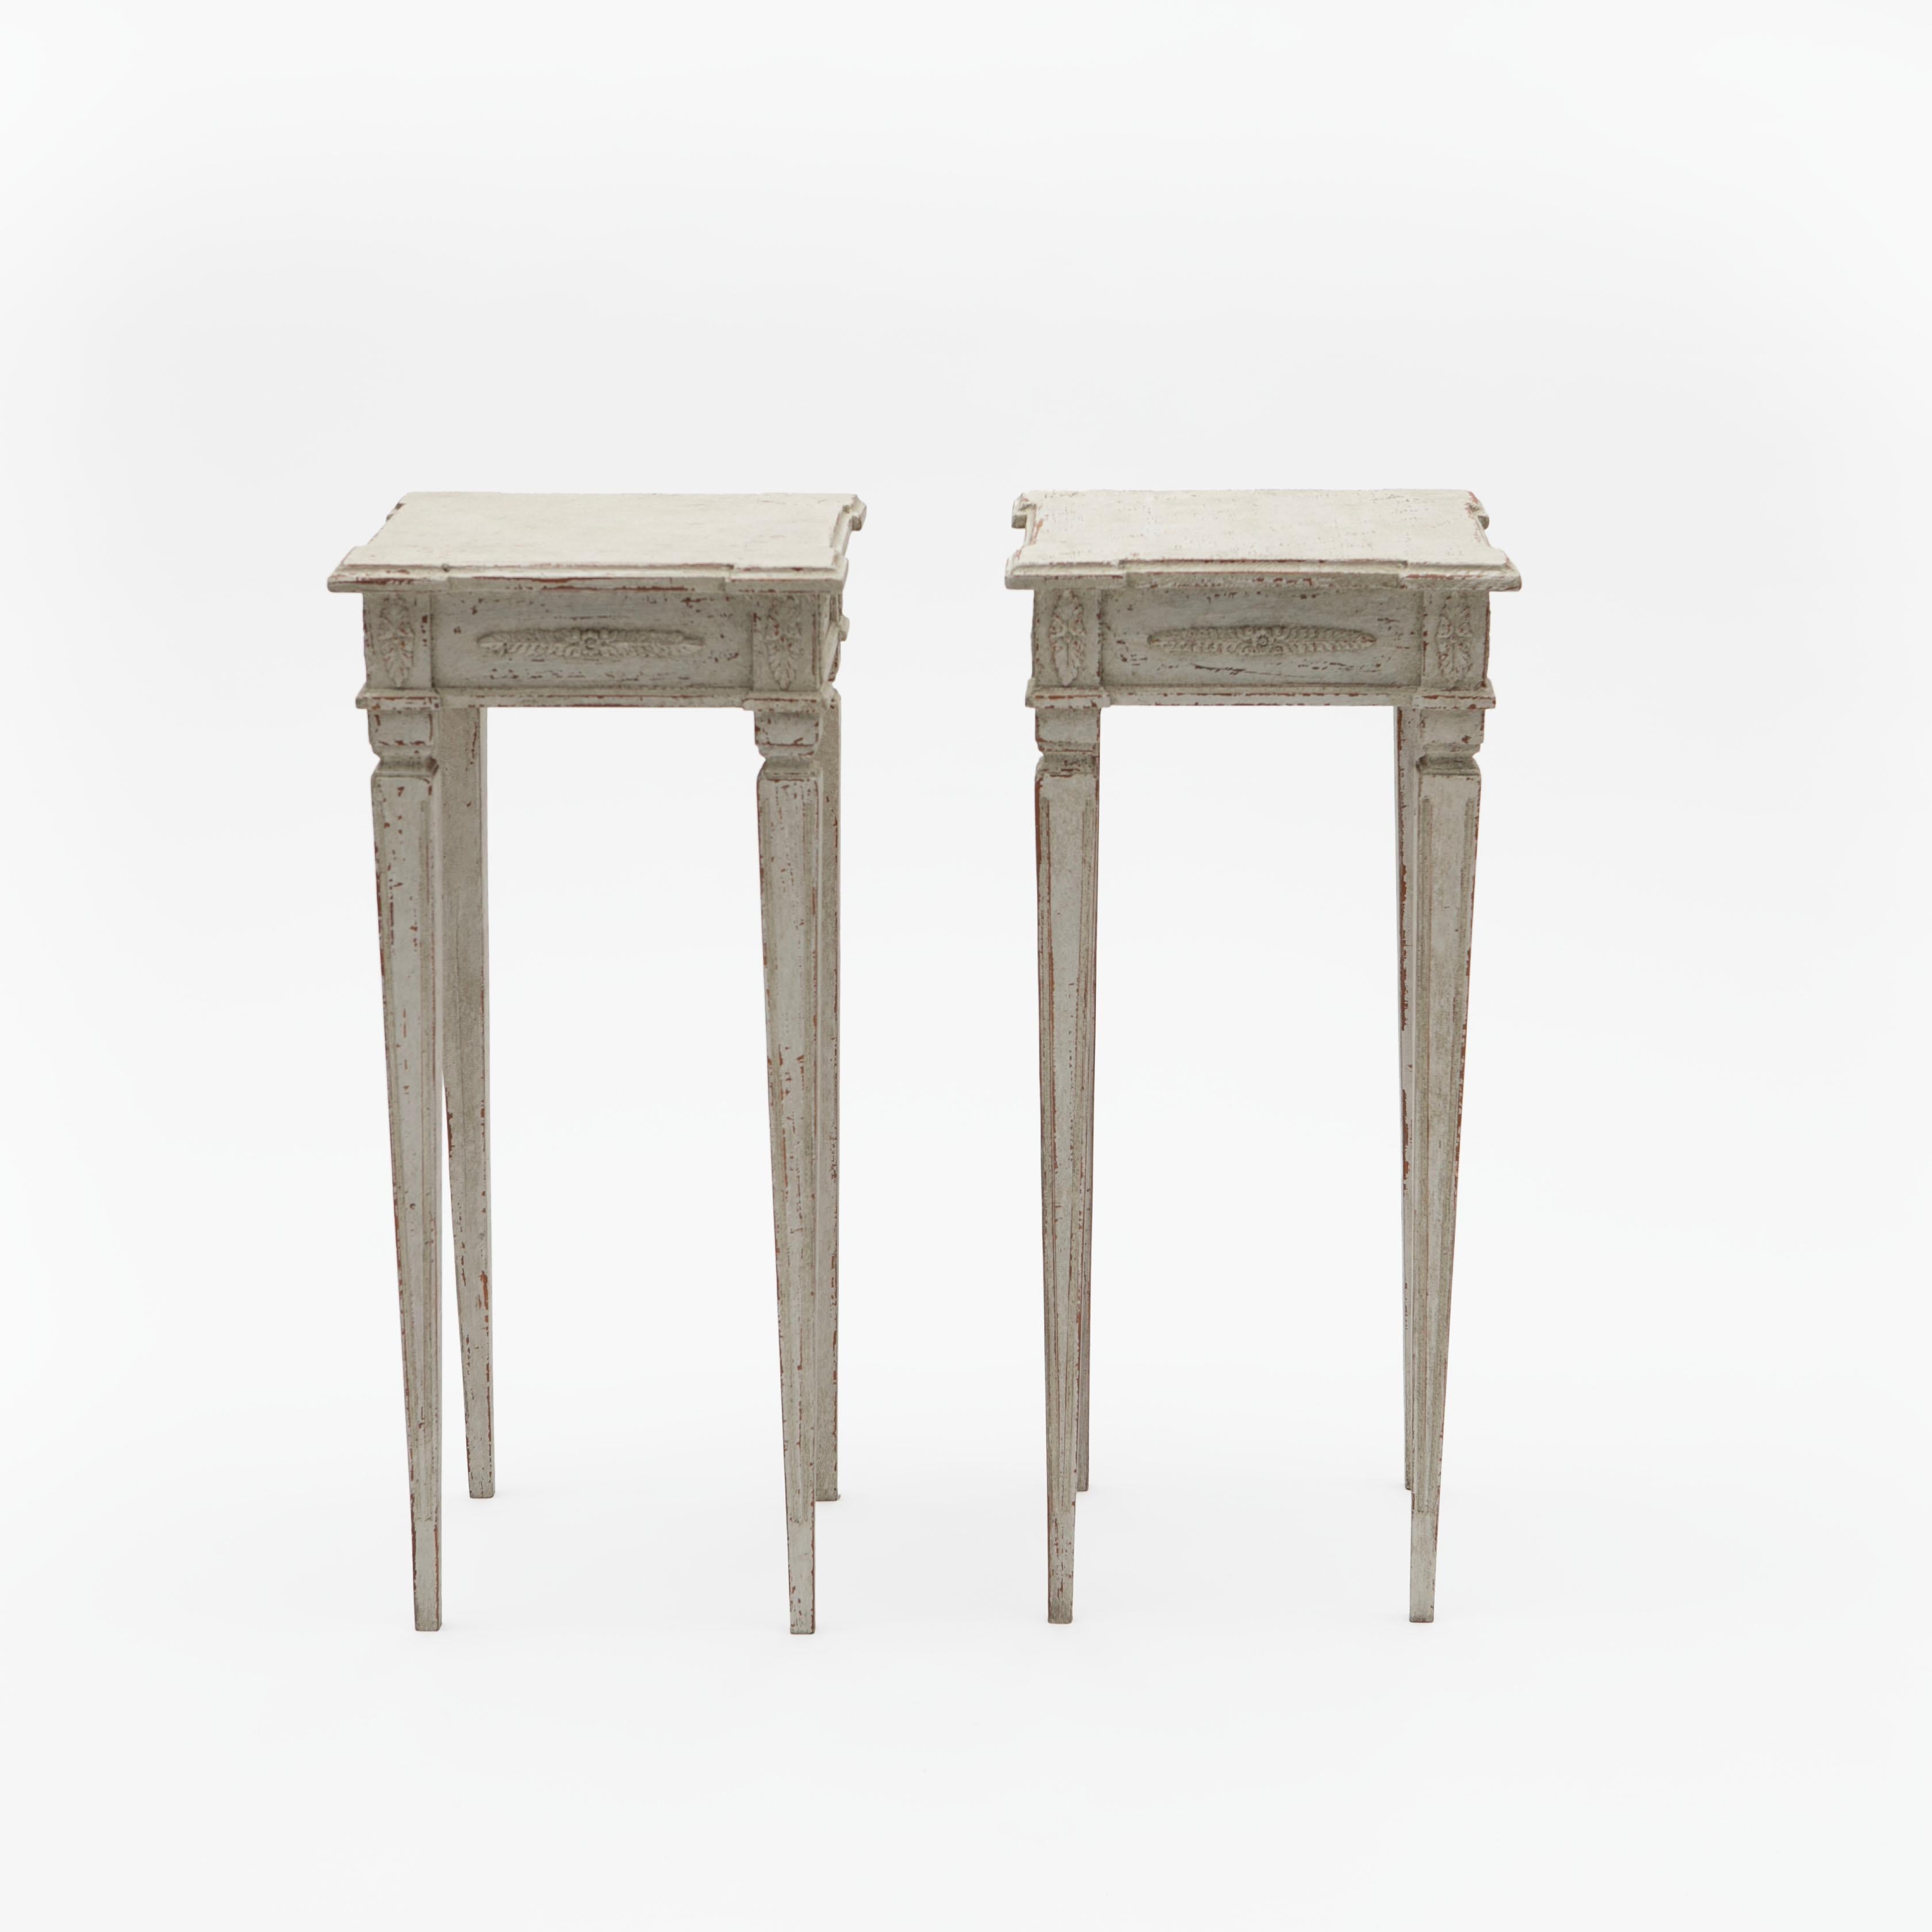 Pair of light grey painted Swedish Gustavian style side lamp tables resting on elegant narrow tapered and fluted legs.
Top with canted corners and a decorative carved skirt.

Sweden 1860-1880